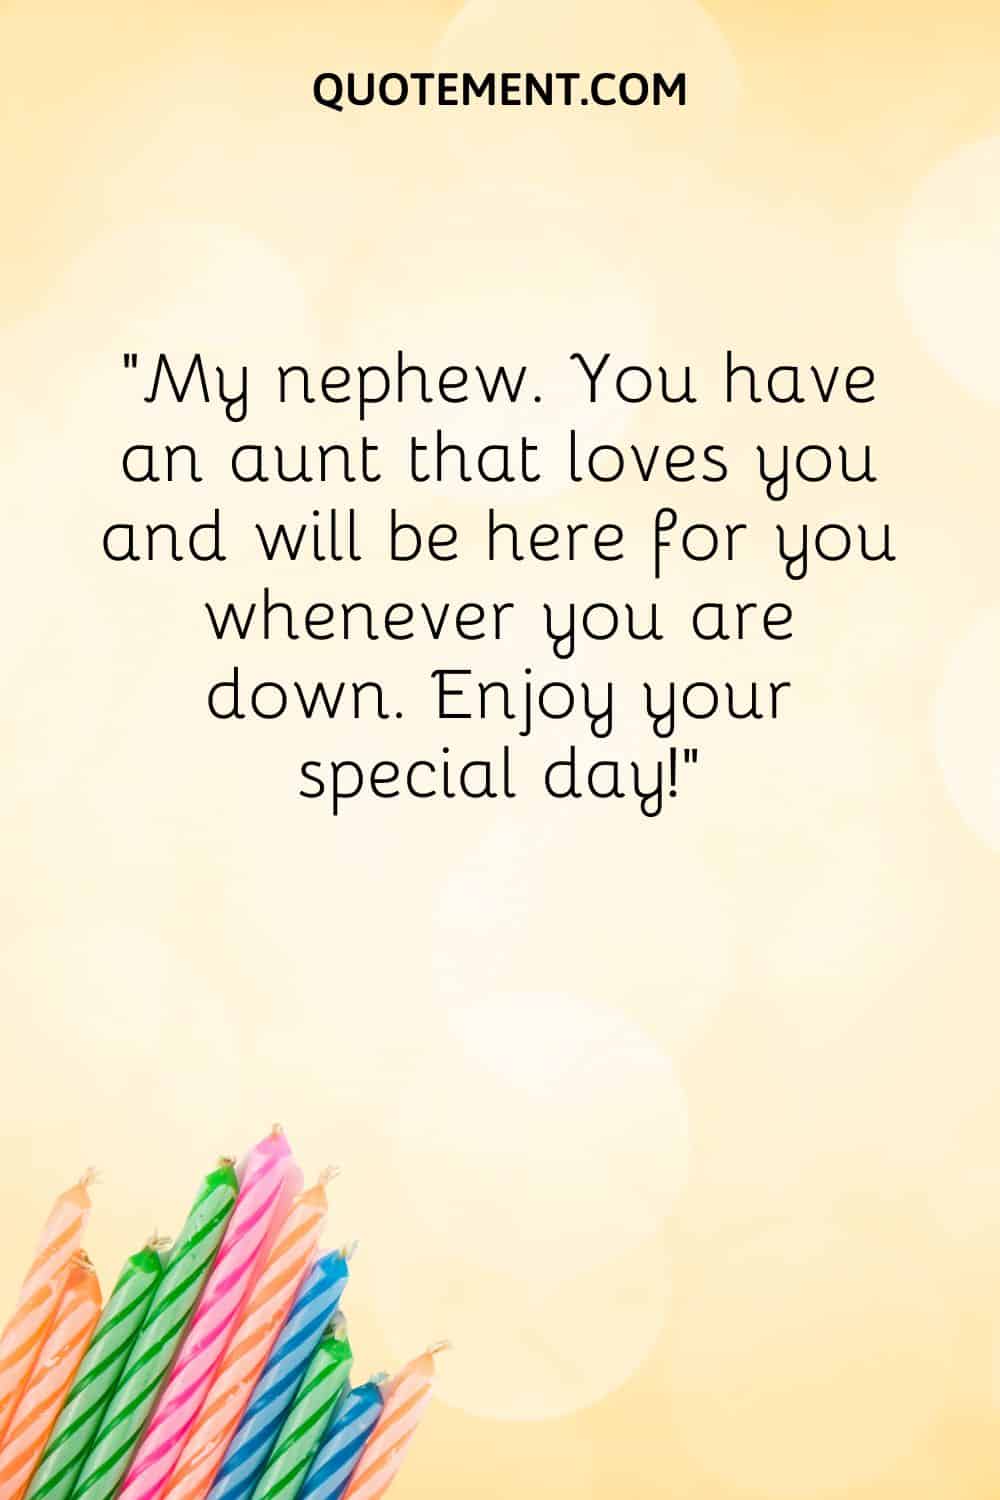 “My nephew. You have an aunt that loves you and will be here for you whenever you are down. Enjoy your special day!”